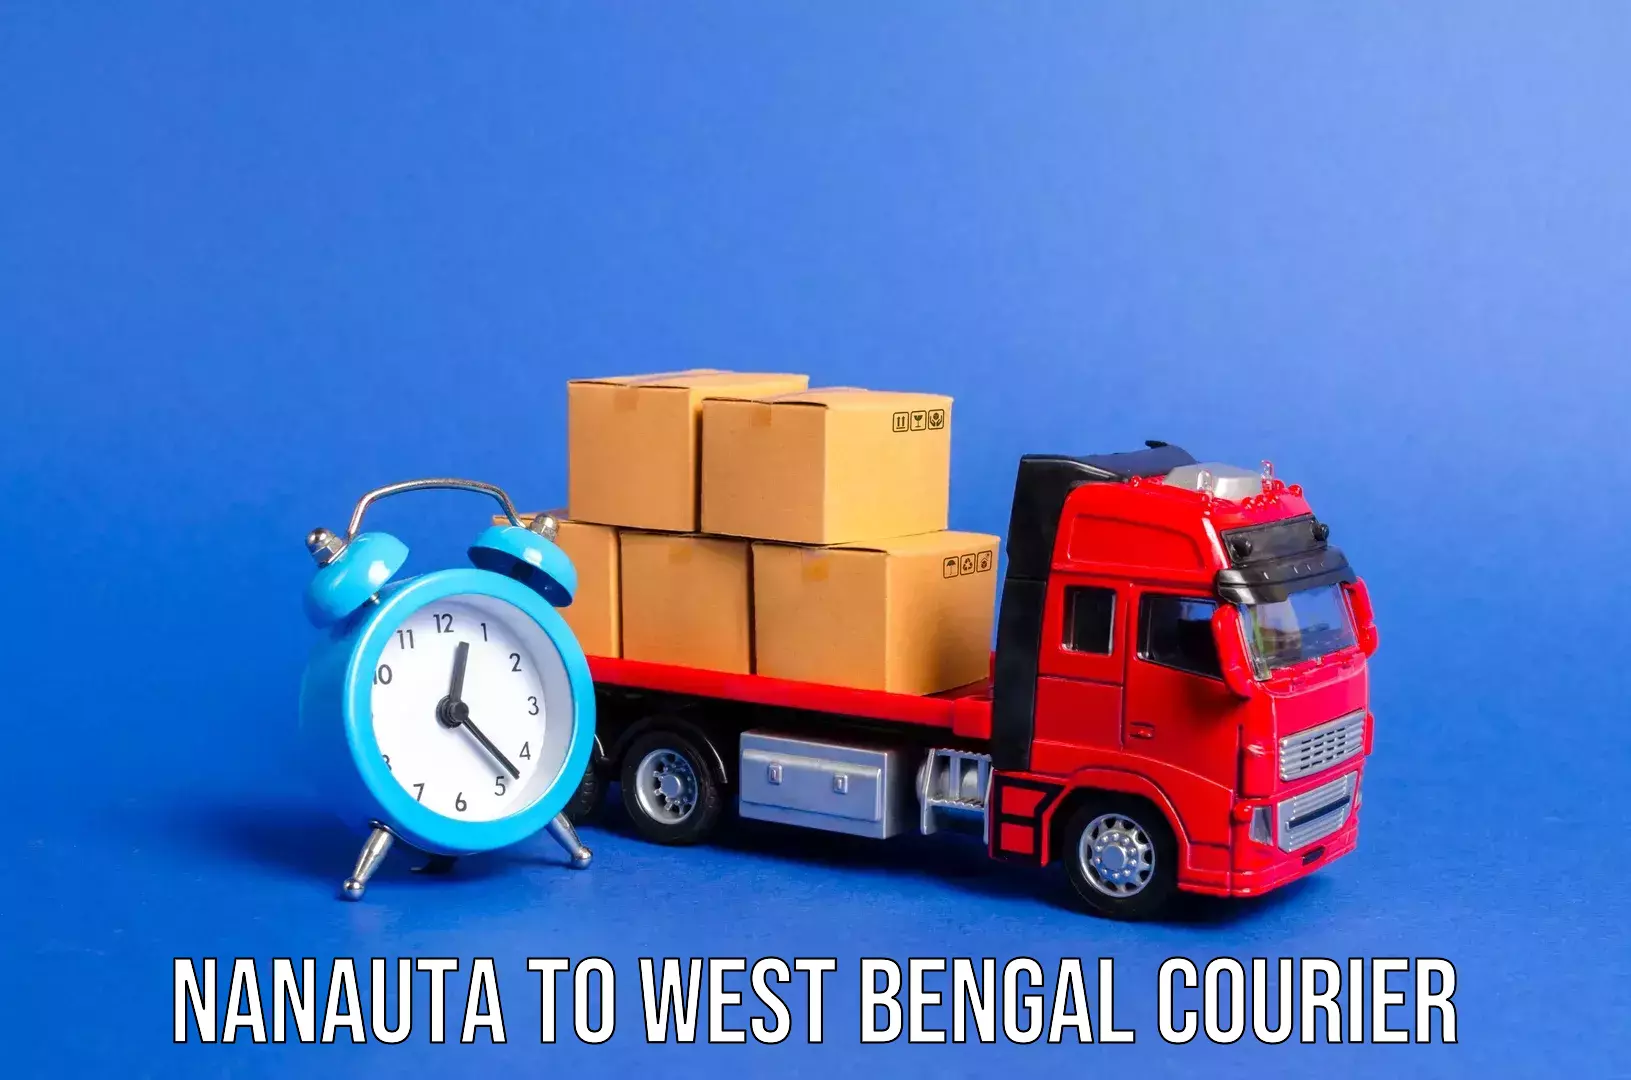 Baggage relocation service Nanauta to West Bengal